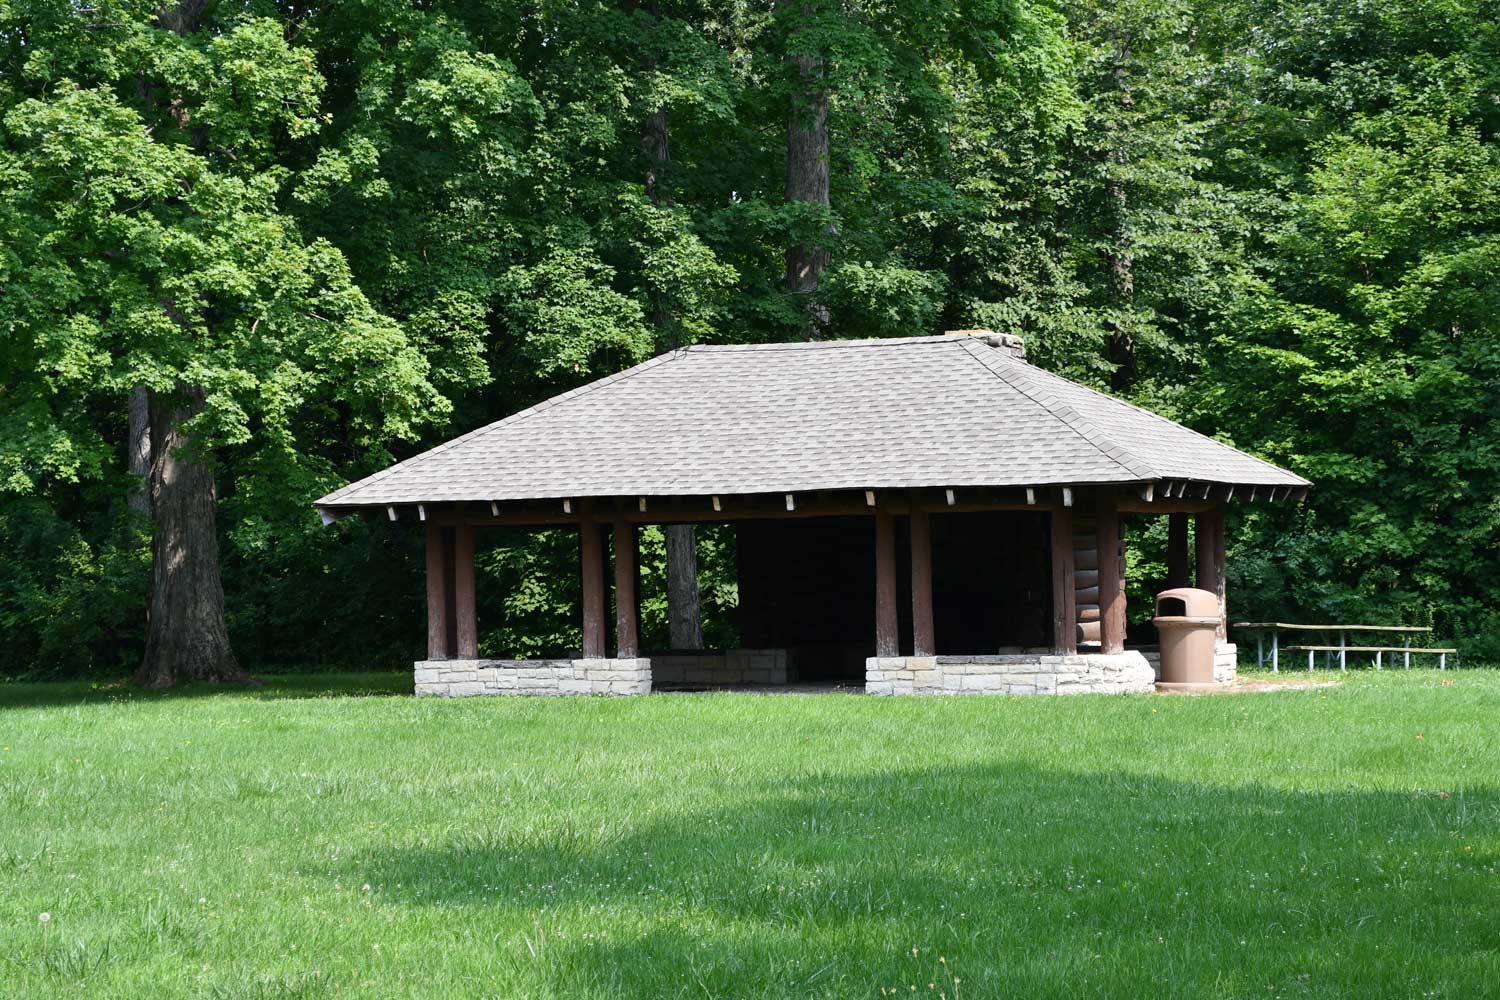 Picnic shelter with trees in background.